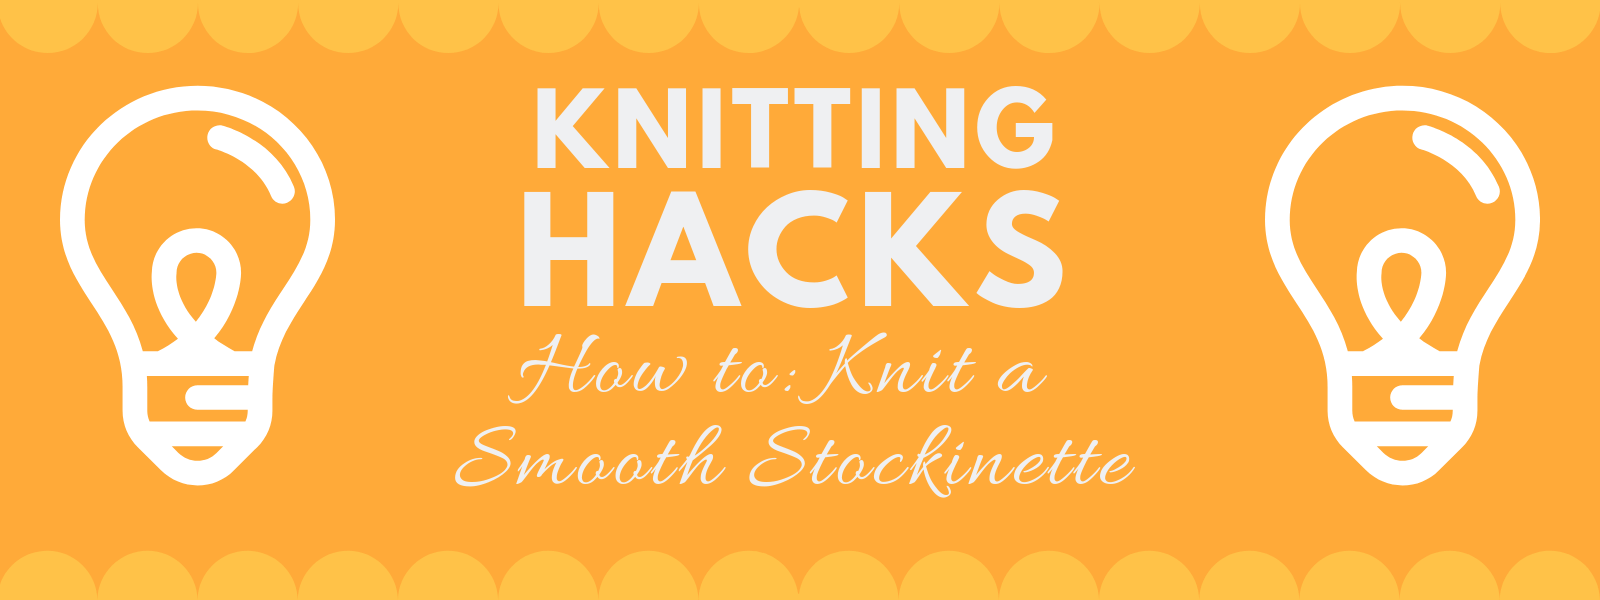 Prevent stockinette edges from curling, is that possible? Yes it is! And this article will teach how to do it and what to do if it has already curled away.